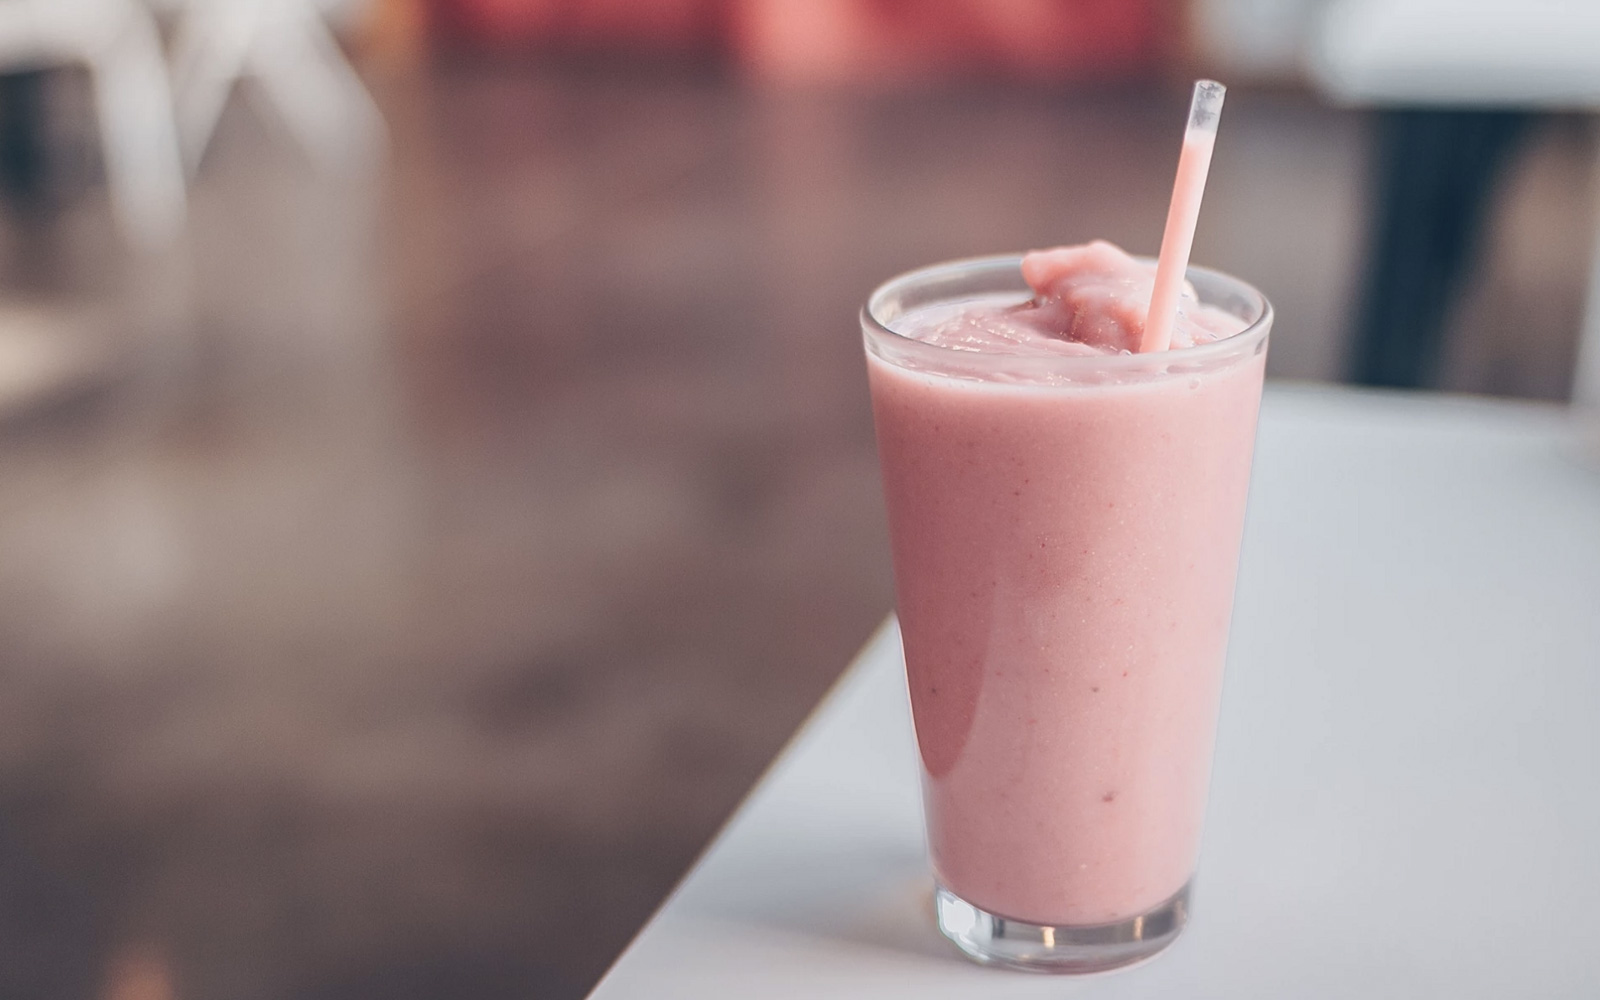 A strawberry milkshake or smoothie that people on a liquid diet consume